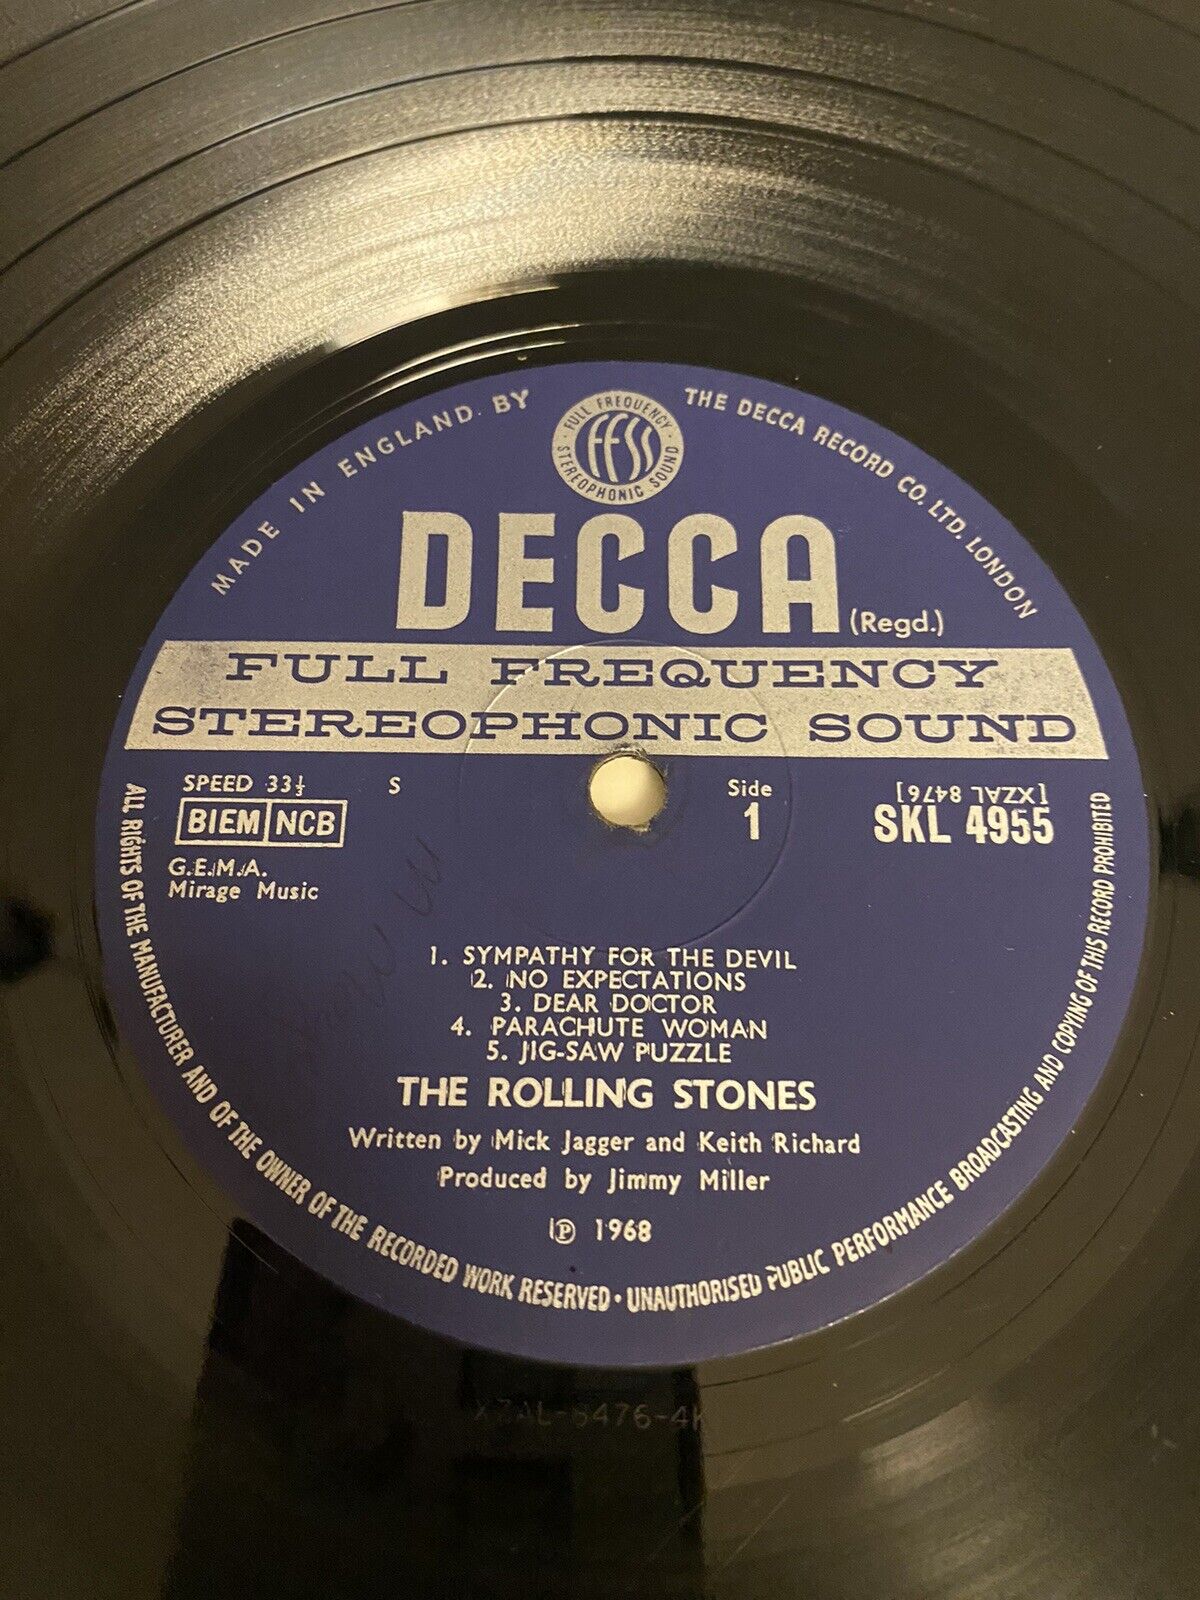 The Rolling Stones - Beggars Banquet UK 1968 Stereo Press LP